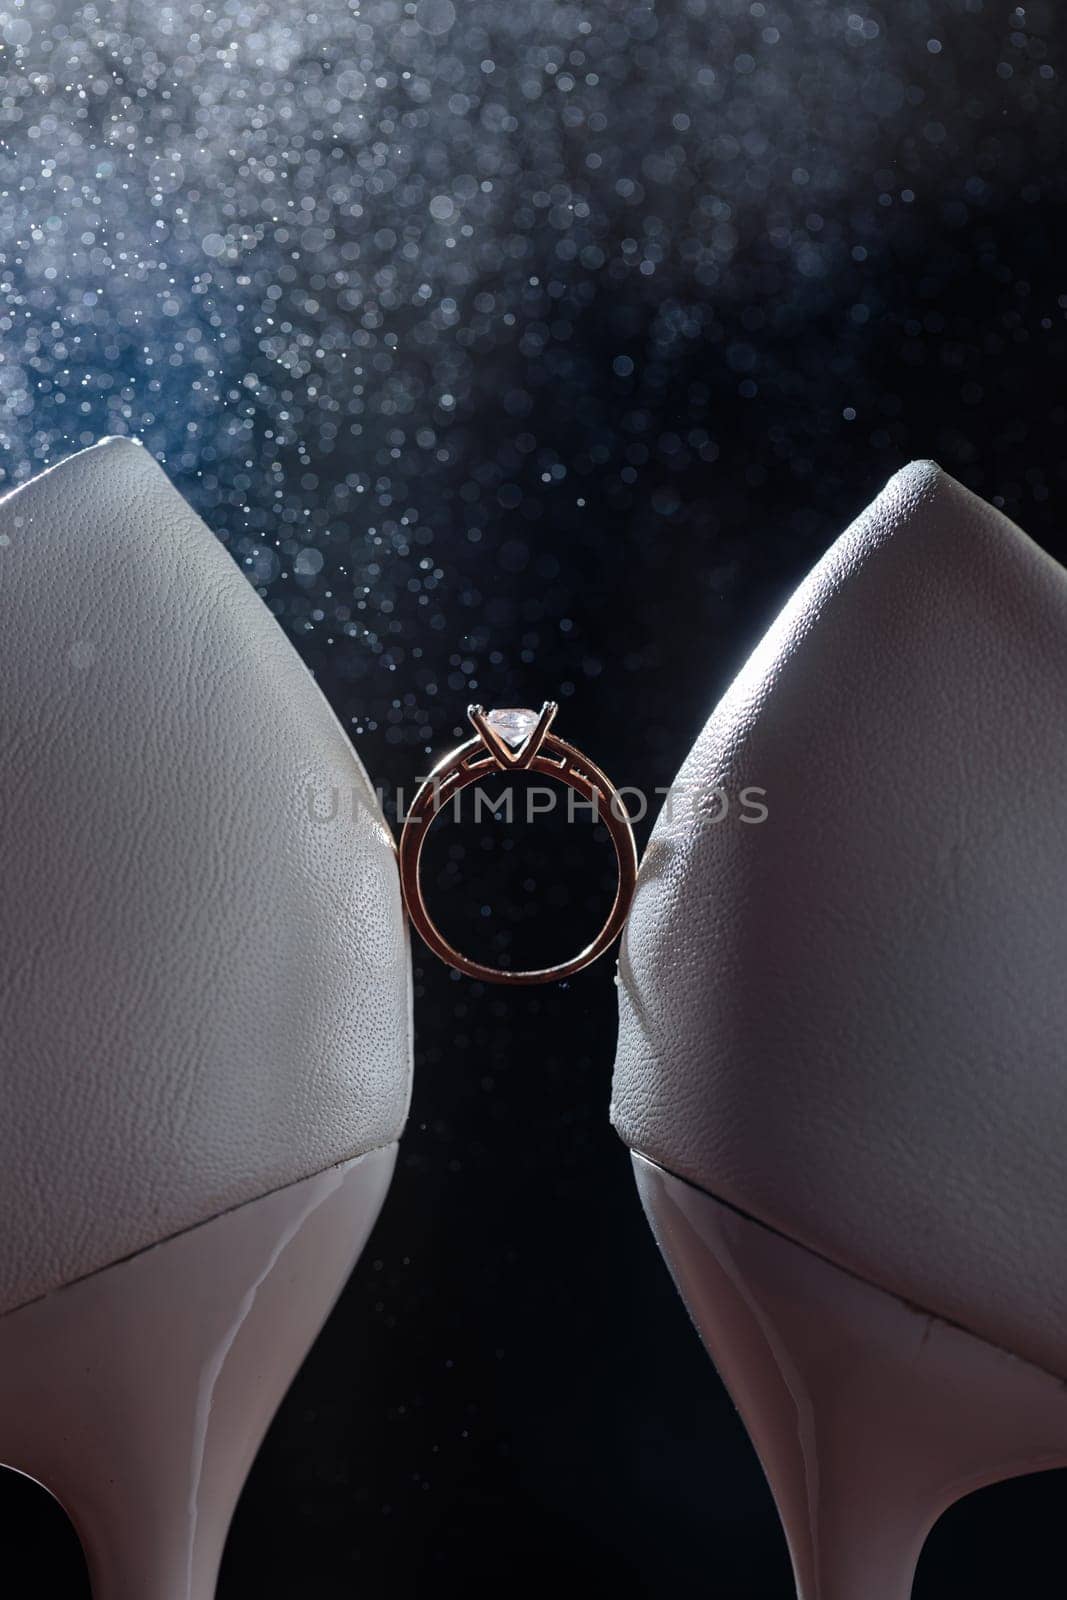 Gold ring of the bride with a pebble between white shoes with heels. Bride's precious ring